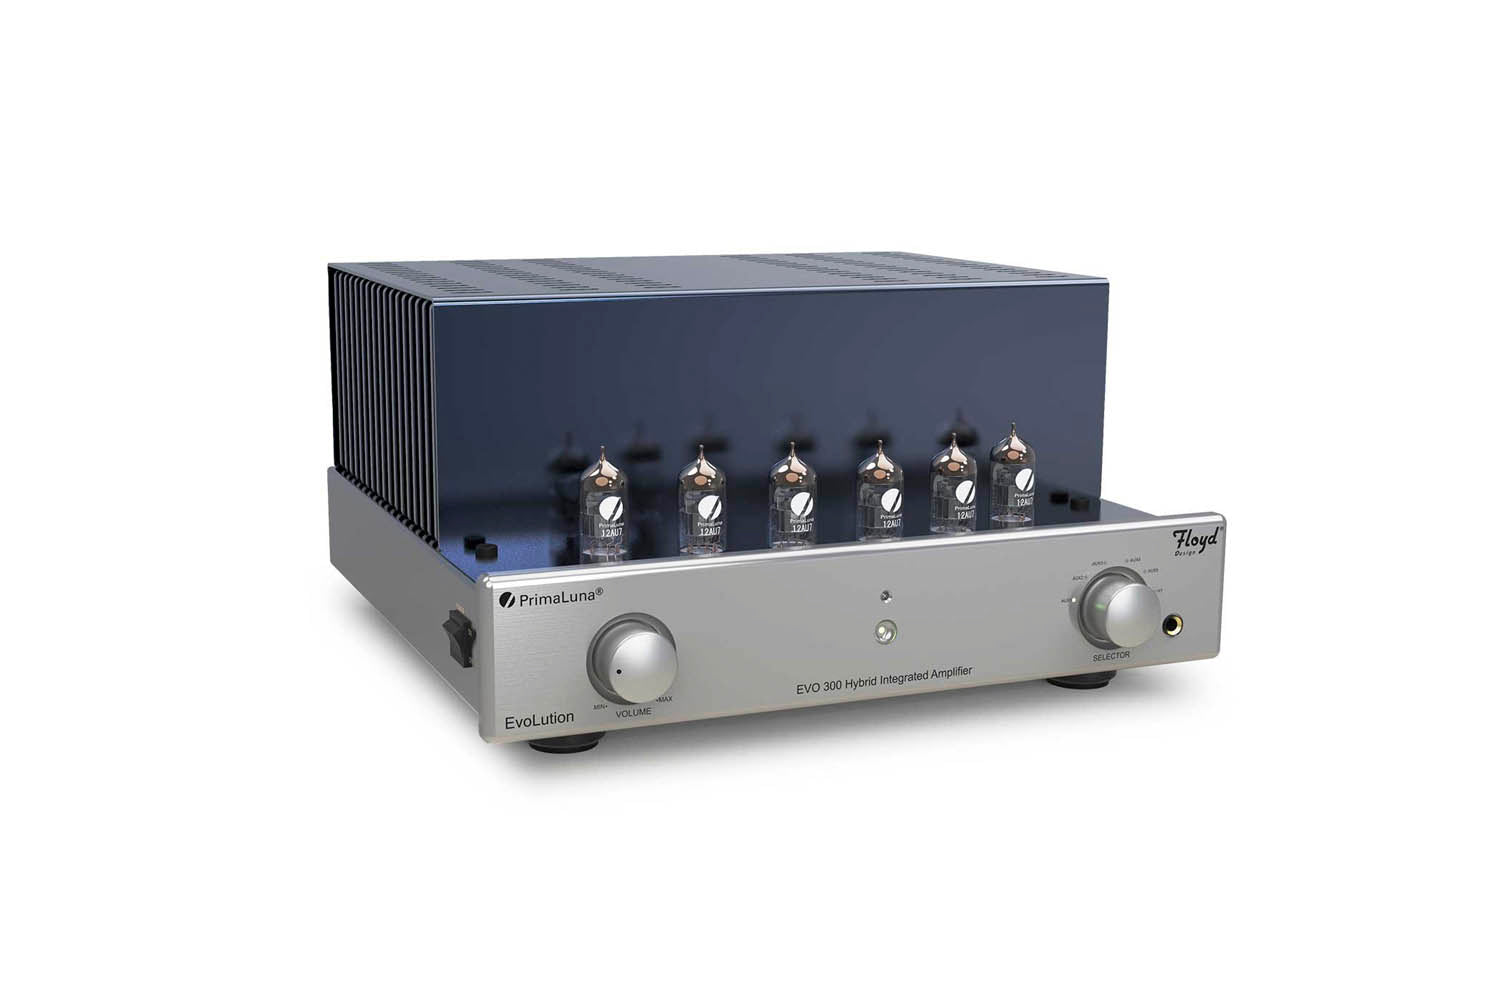 PRIMALUNA EVO 300 TUBE HYBRID INTEGRATED AMPLIFIER - Discover the high quality music at a very best price at Vinyl Sound. Check out the Integrated Amplifiers: PrimaLuna EVO 300, Primaluna evo 100, Primaluna evo 200, The Power Amplifiers: Primaluna evo 400, PrimaLuna Evo 30, Primaluna evo 100, The Preamplifiers: Primaluna evo 100, Primaluna evo 300, Tube-Hybrid Integrated, the PrimaLuna transformers...